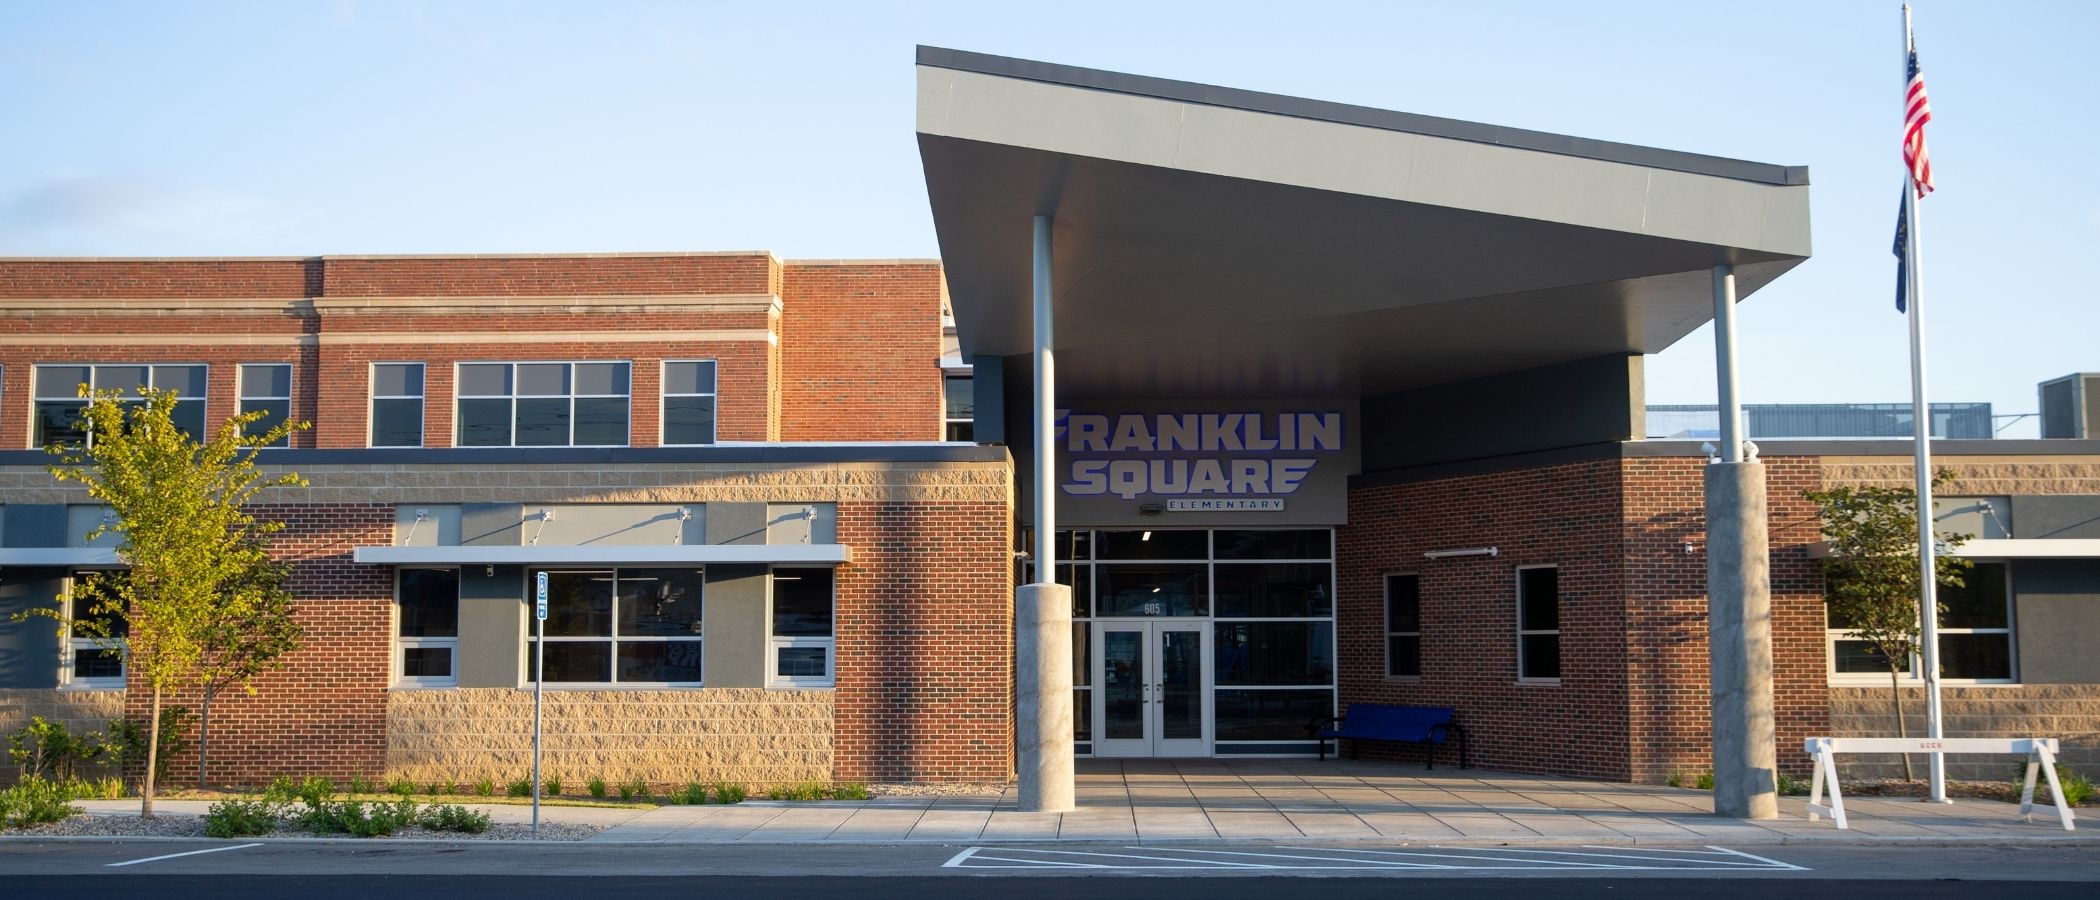 franklin-square-elementary-home-gccs-franklin-square-elementary